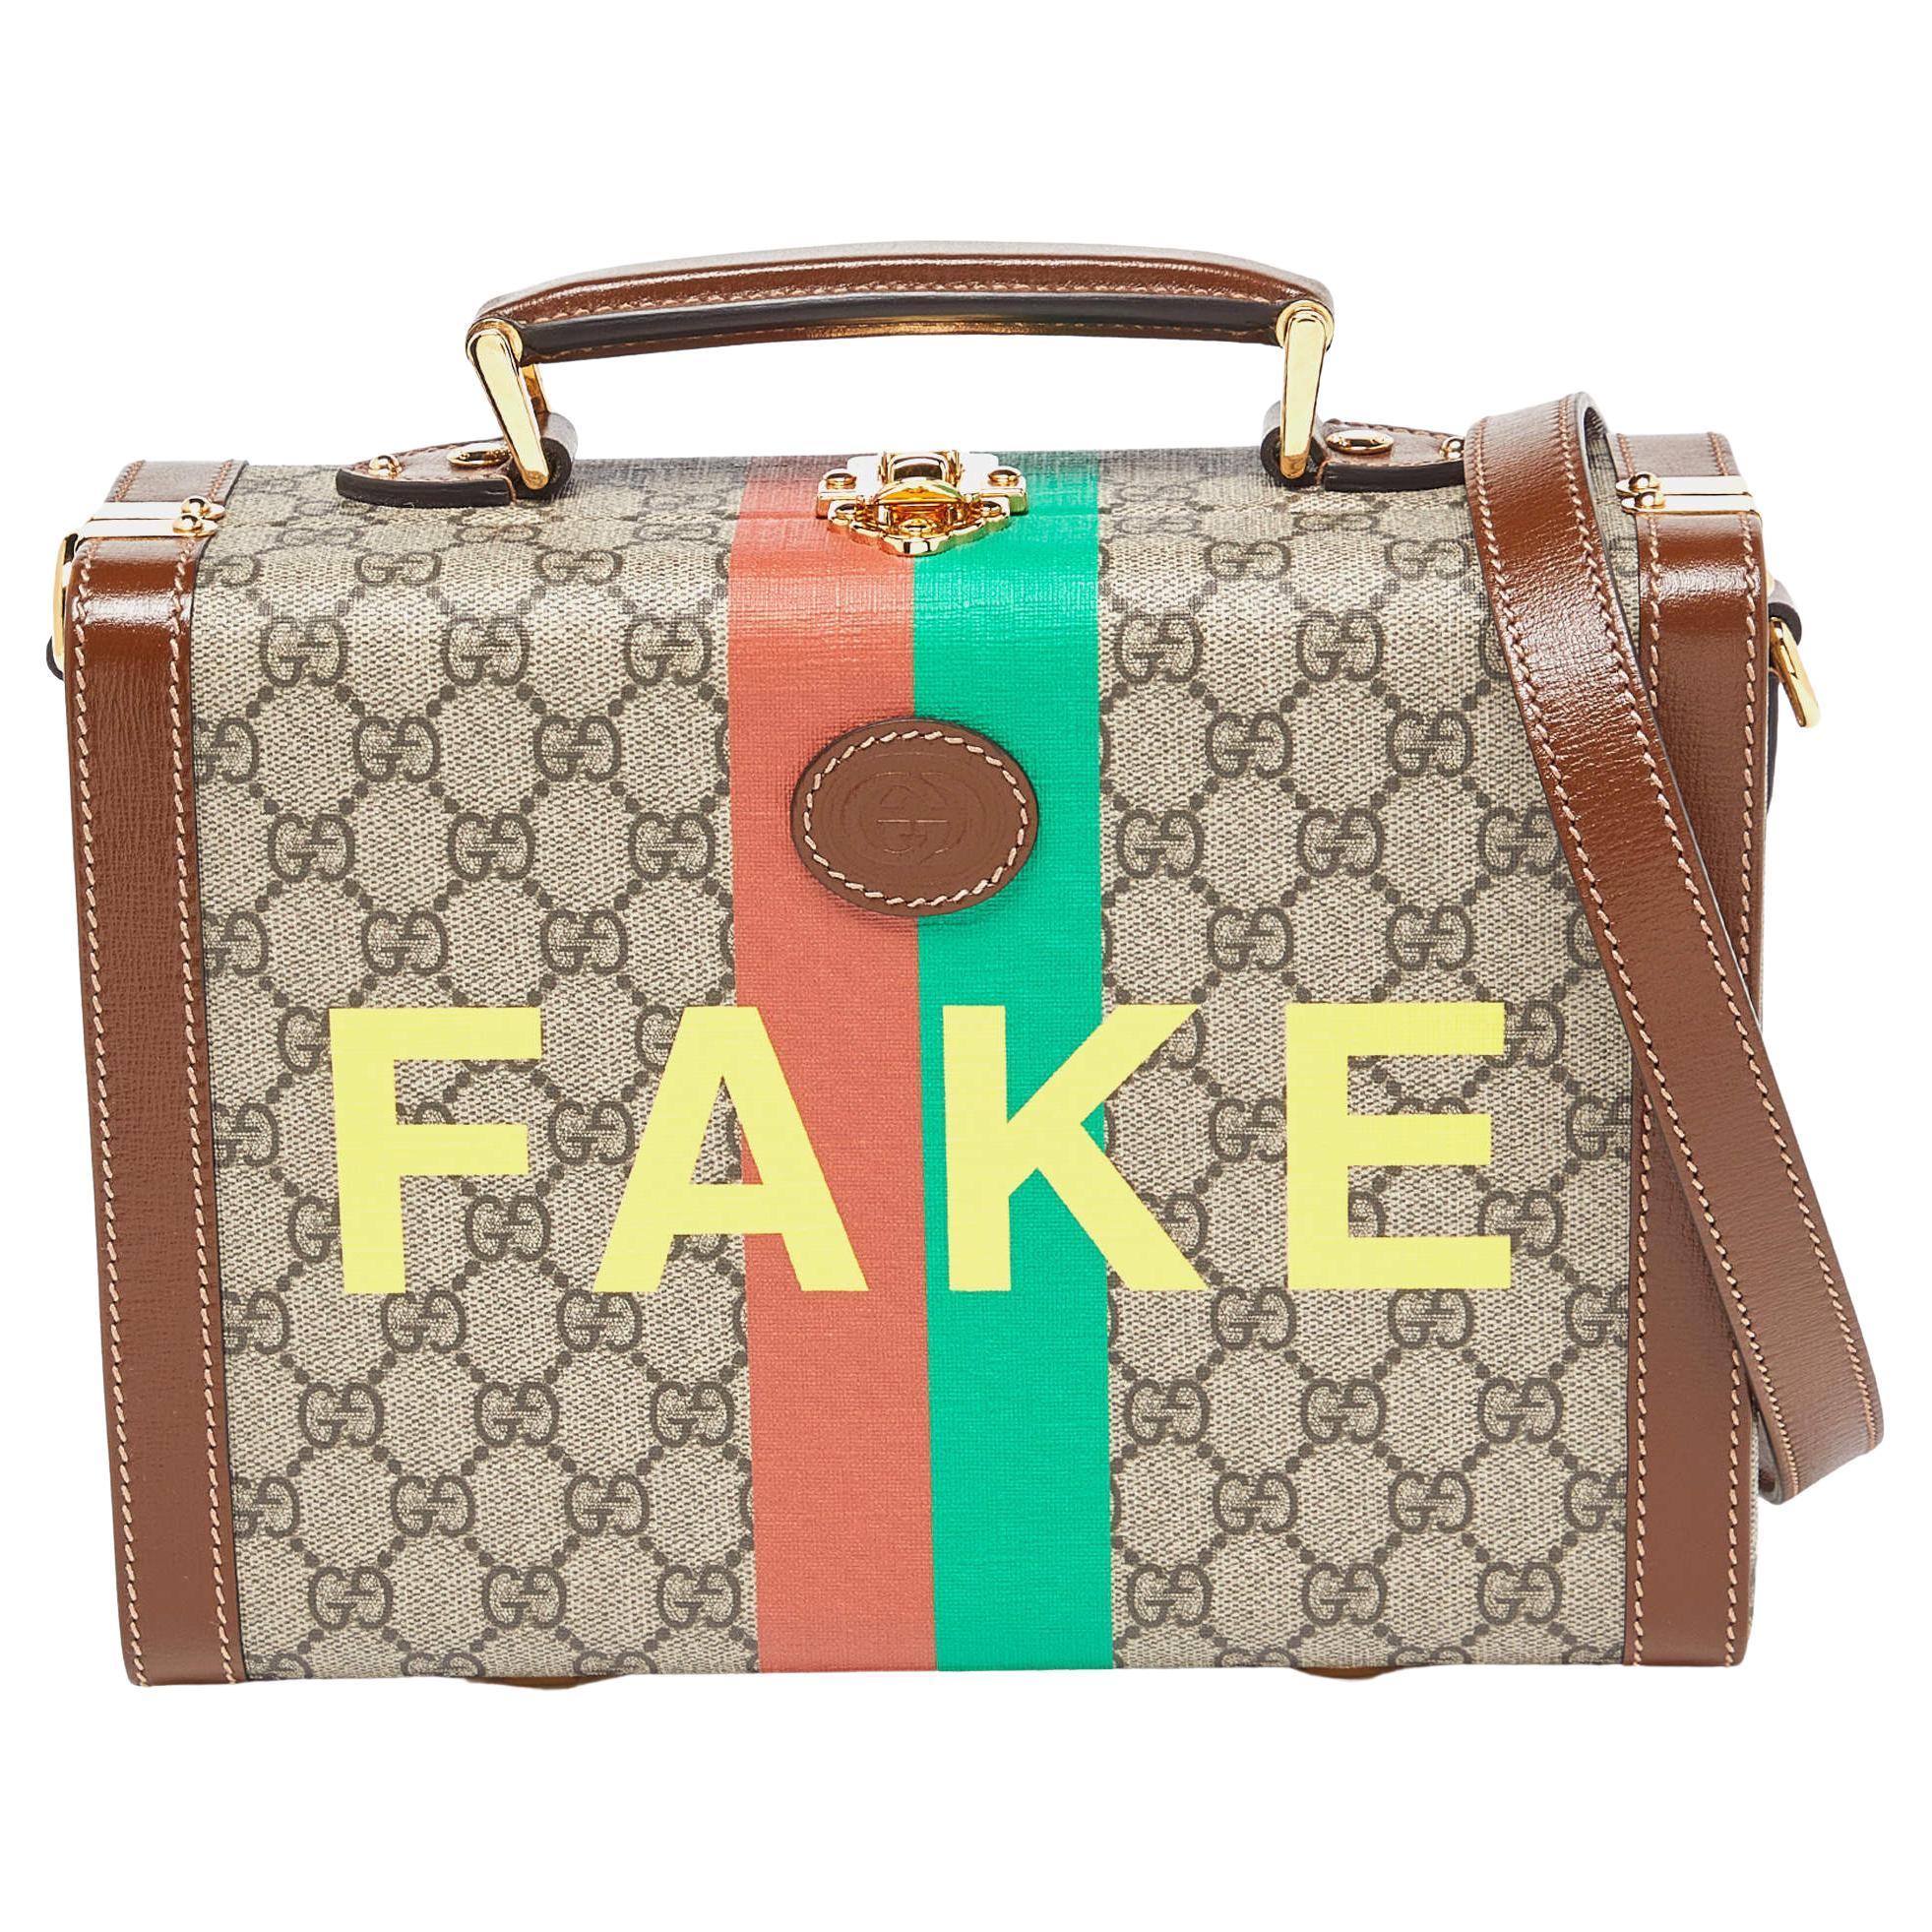 Gucci Brown/Beige GG Supreme Canvas and Leather Fake/Not Savoy Beauty Case Bag For Sale